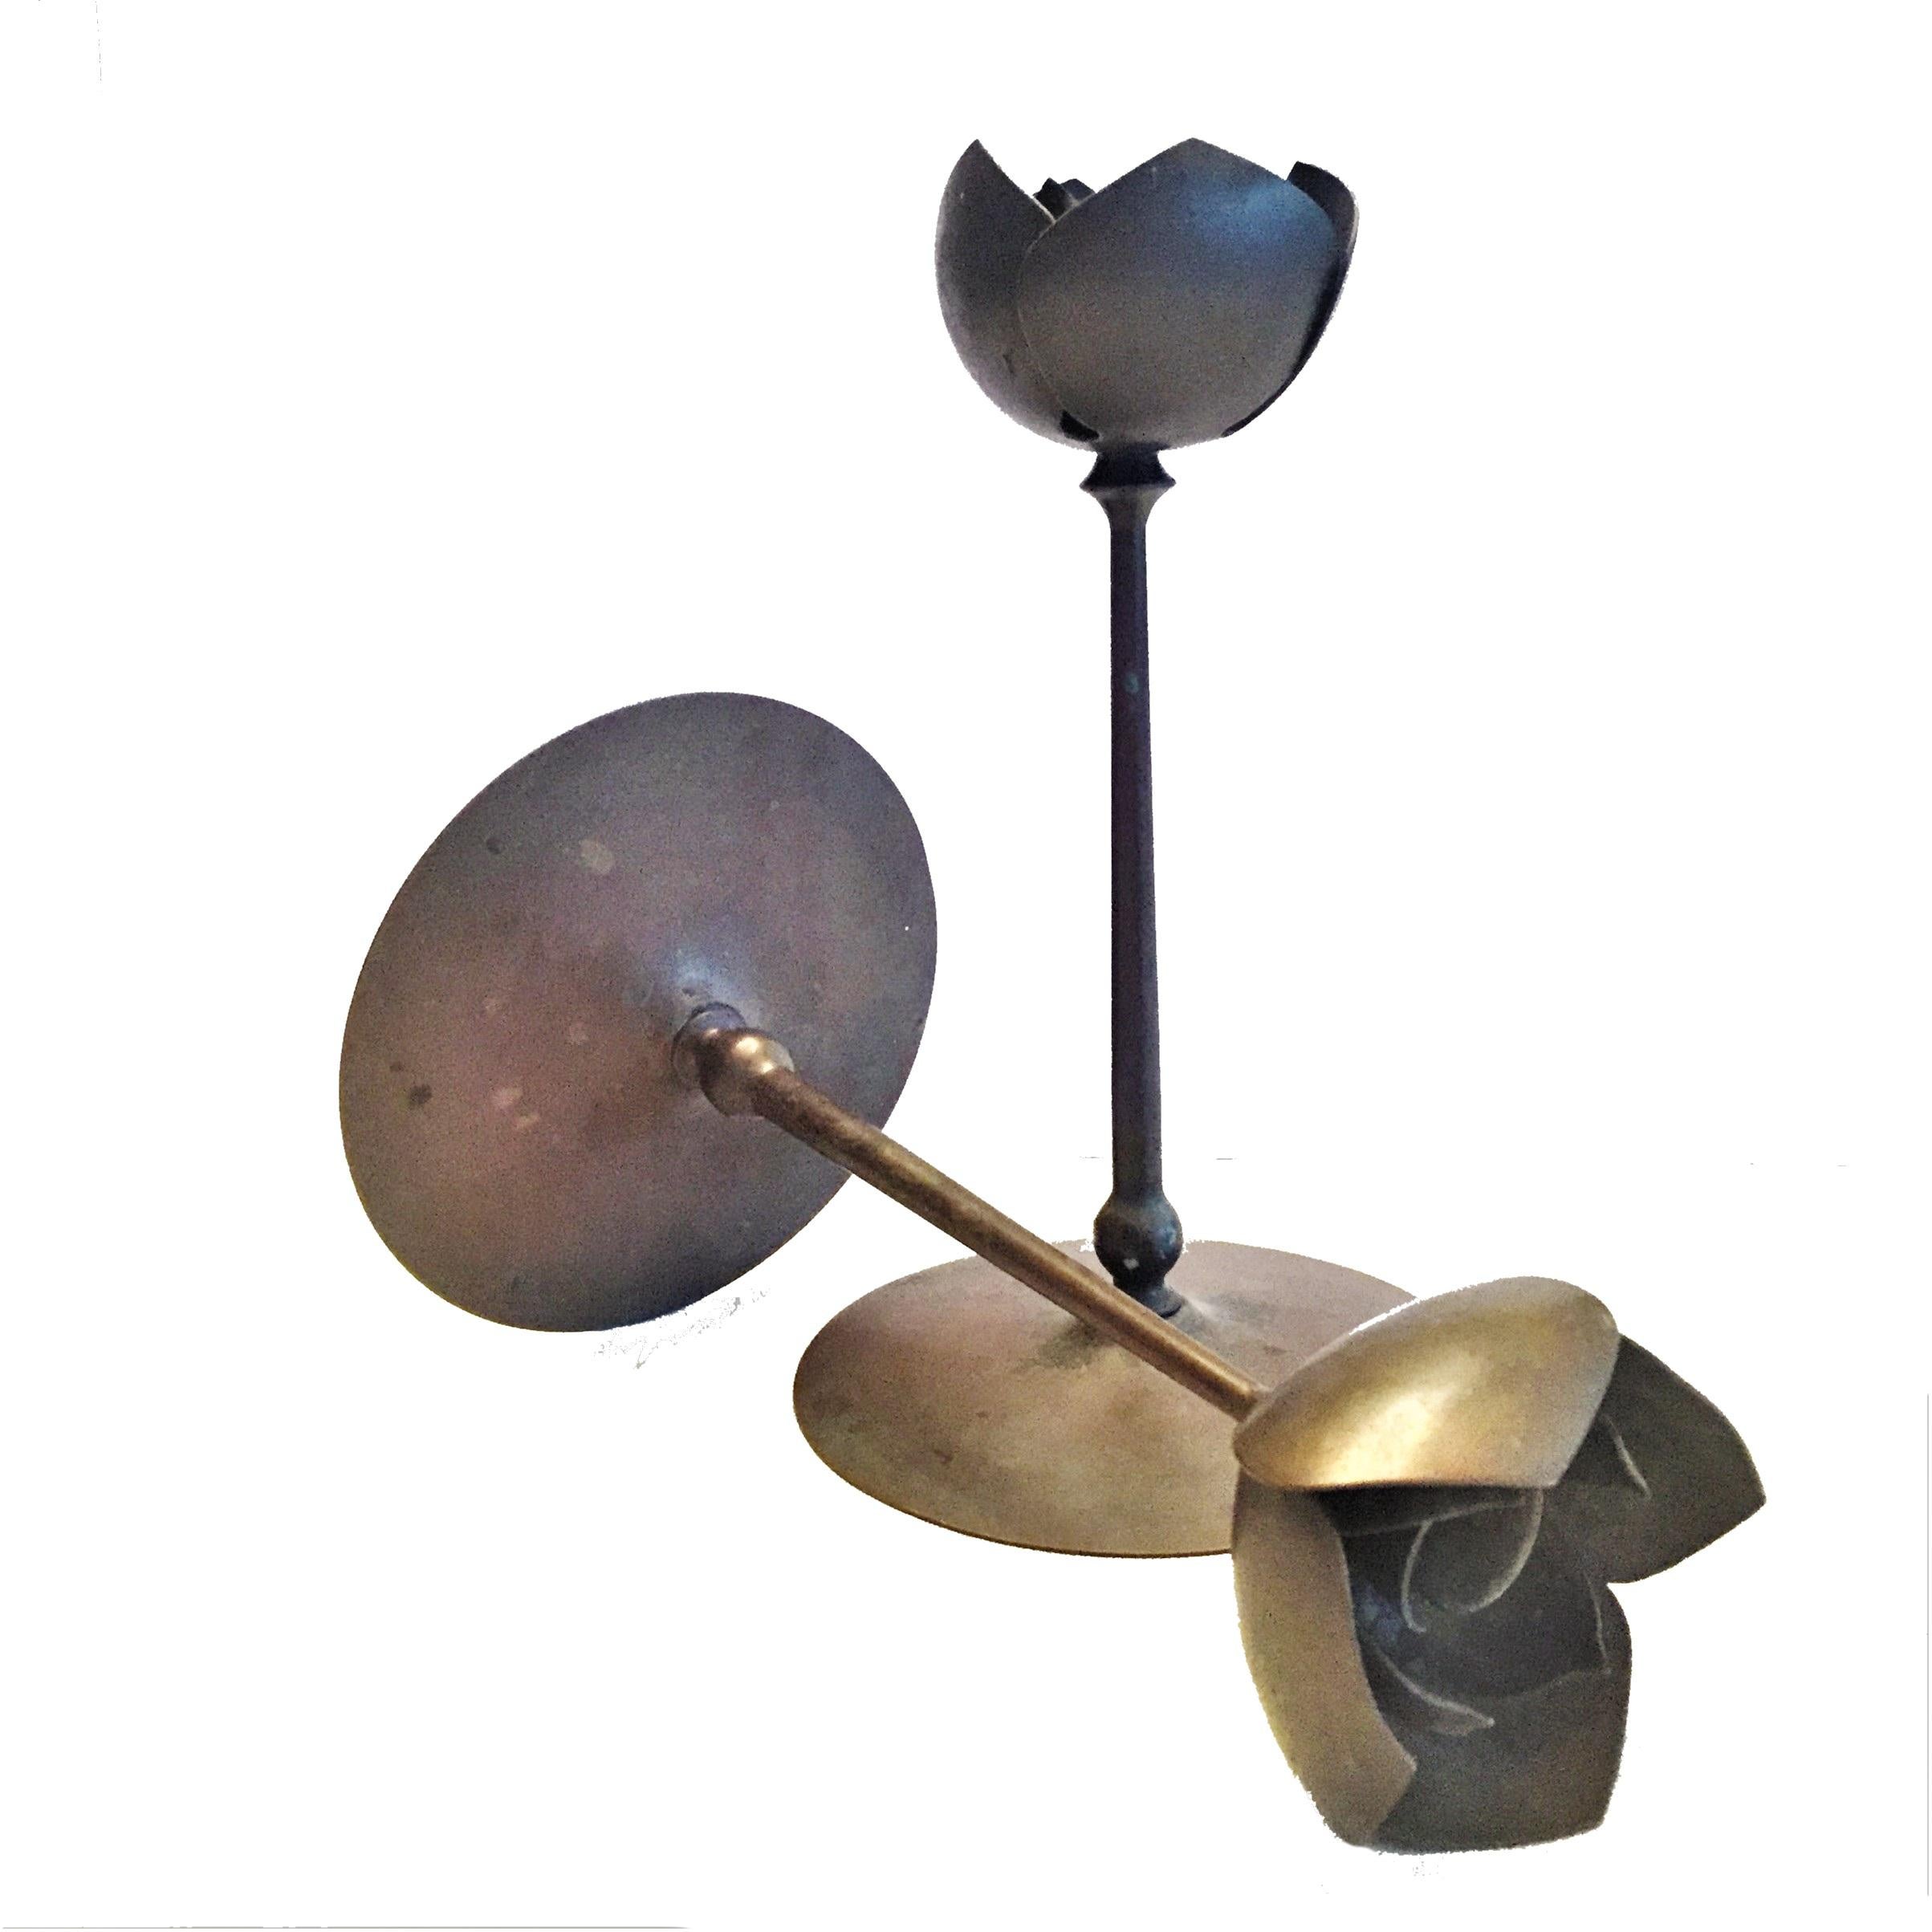 20th Century Pair of Mid-Century Modernist Anodized Brass Lotus Candlesticks, USA, 1950s For Sale